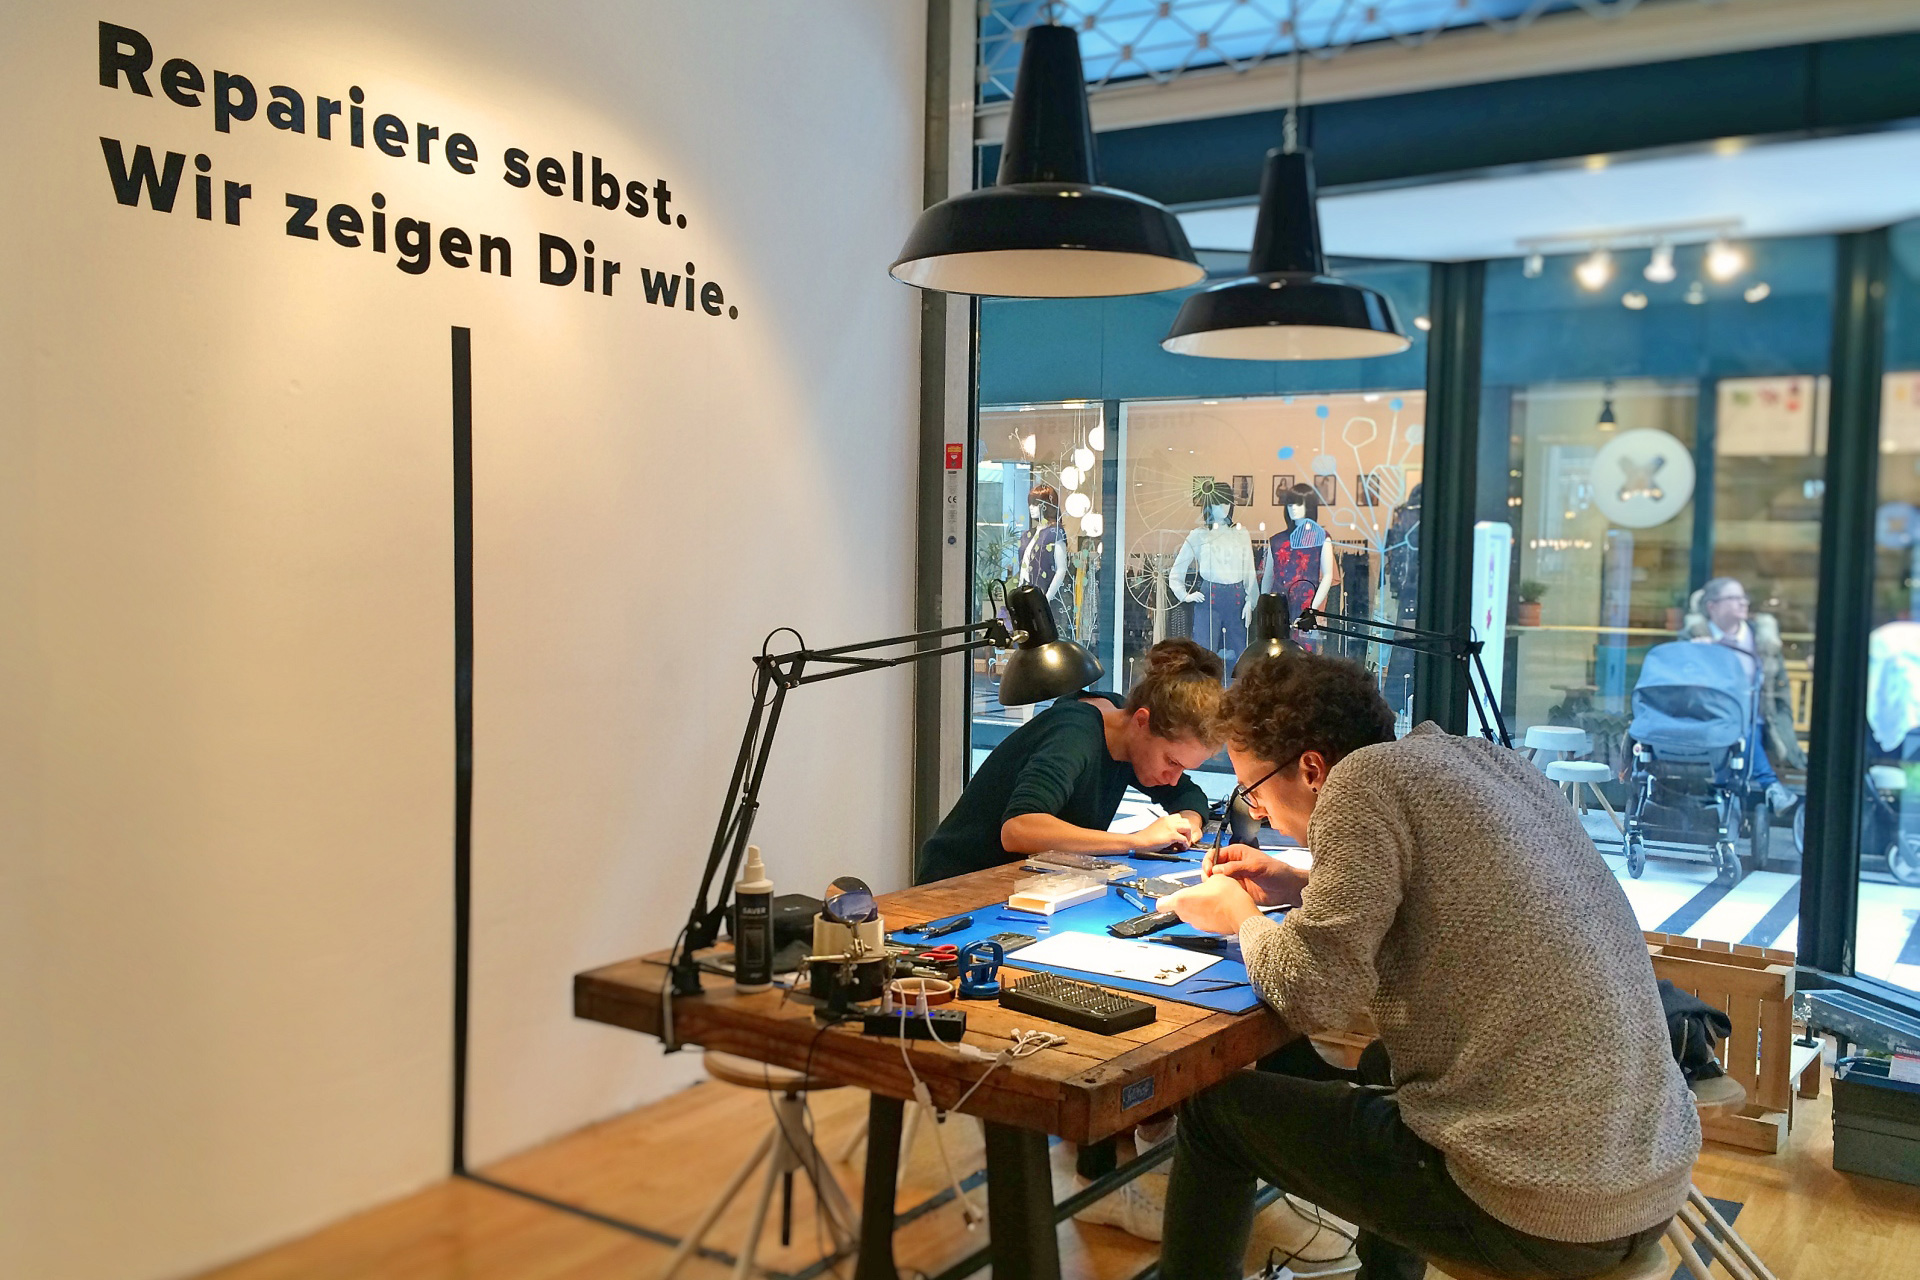 Two people repairing devices in the iFixit pop-up repair shop at the Fluxus Mall